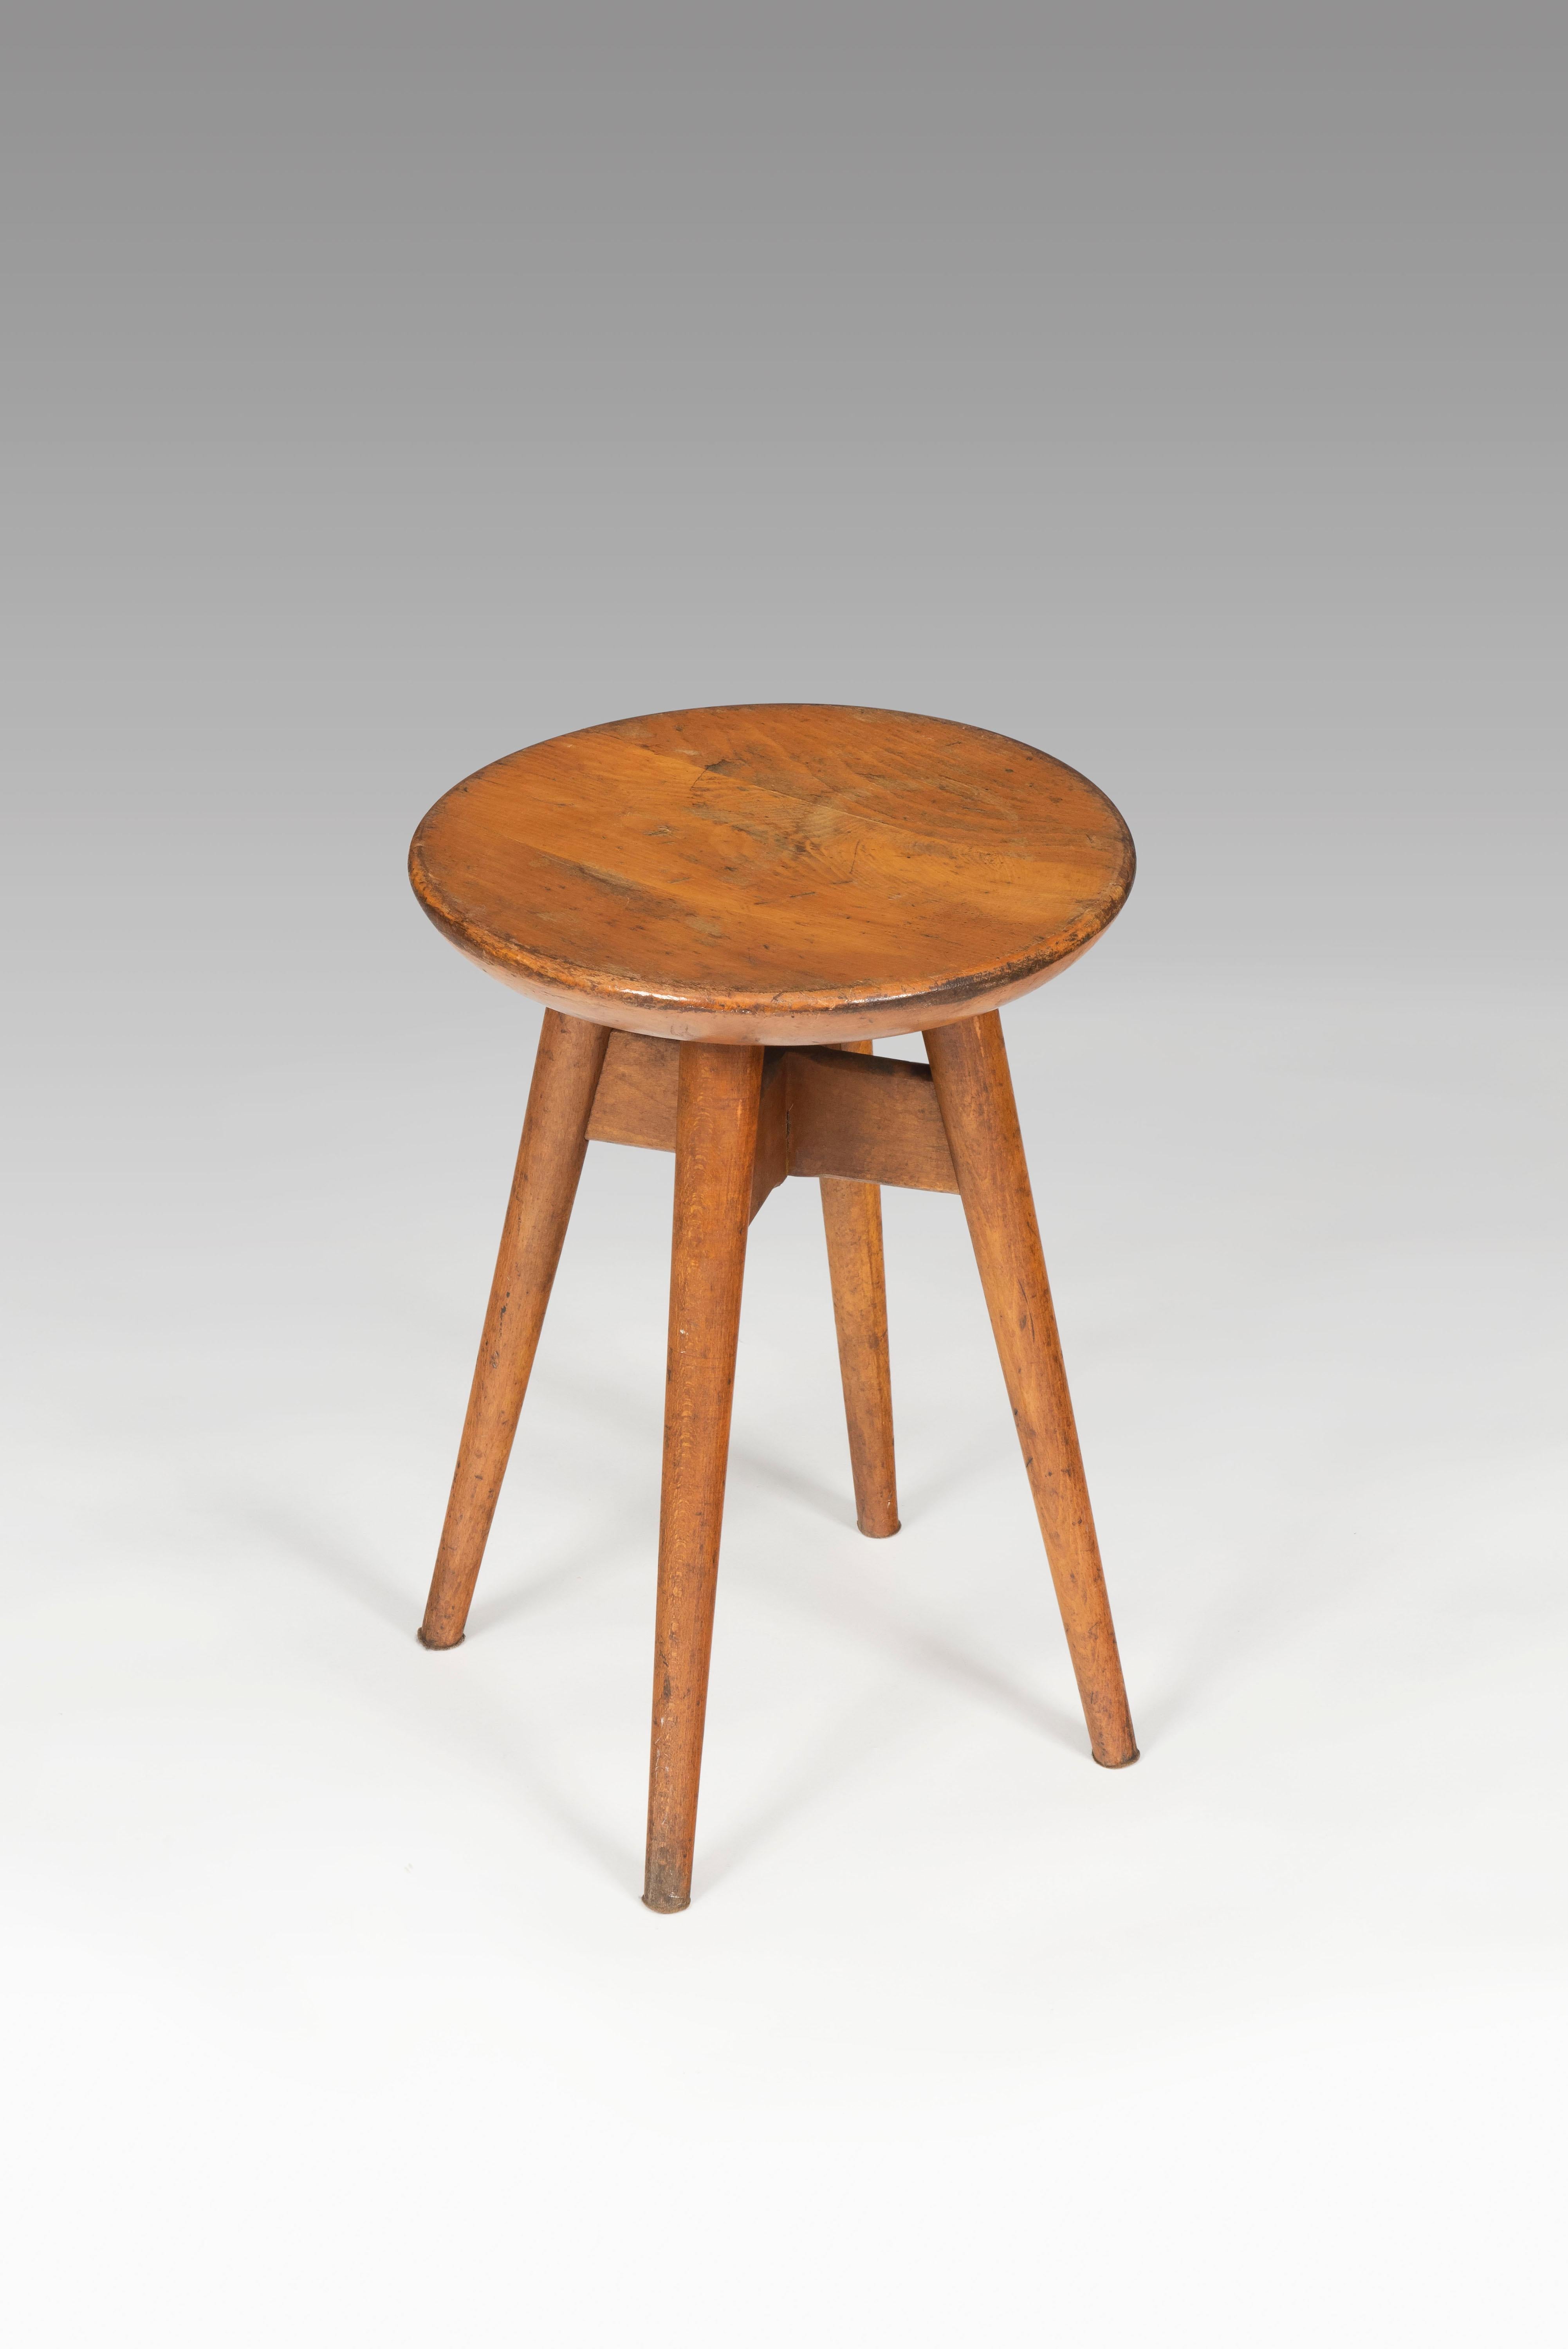 Prototype for the famous mass produced Ring stool by Tendo Mokko. Beautiful patina.
Kato, Tokukichi (1901-1987). He was a carpenter specialising in the construction of temples and sanctuaries before he founded the famous Japanese design company